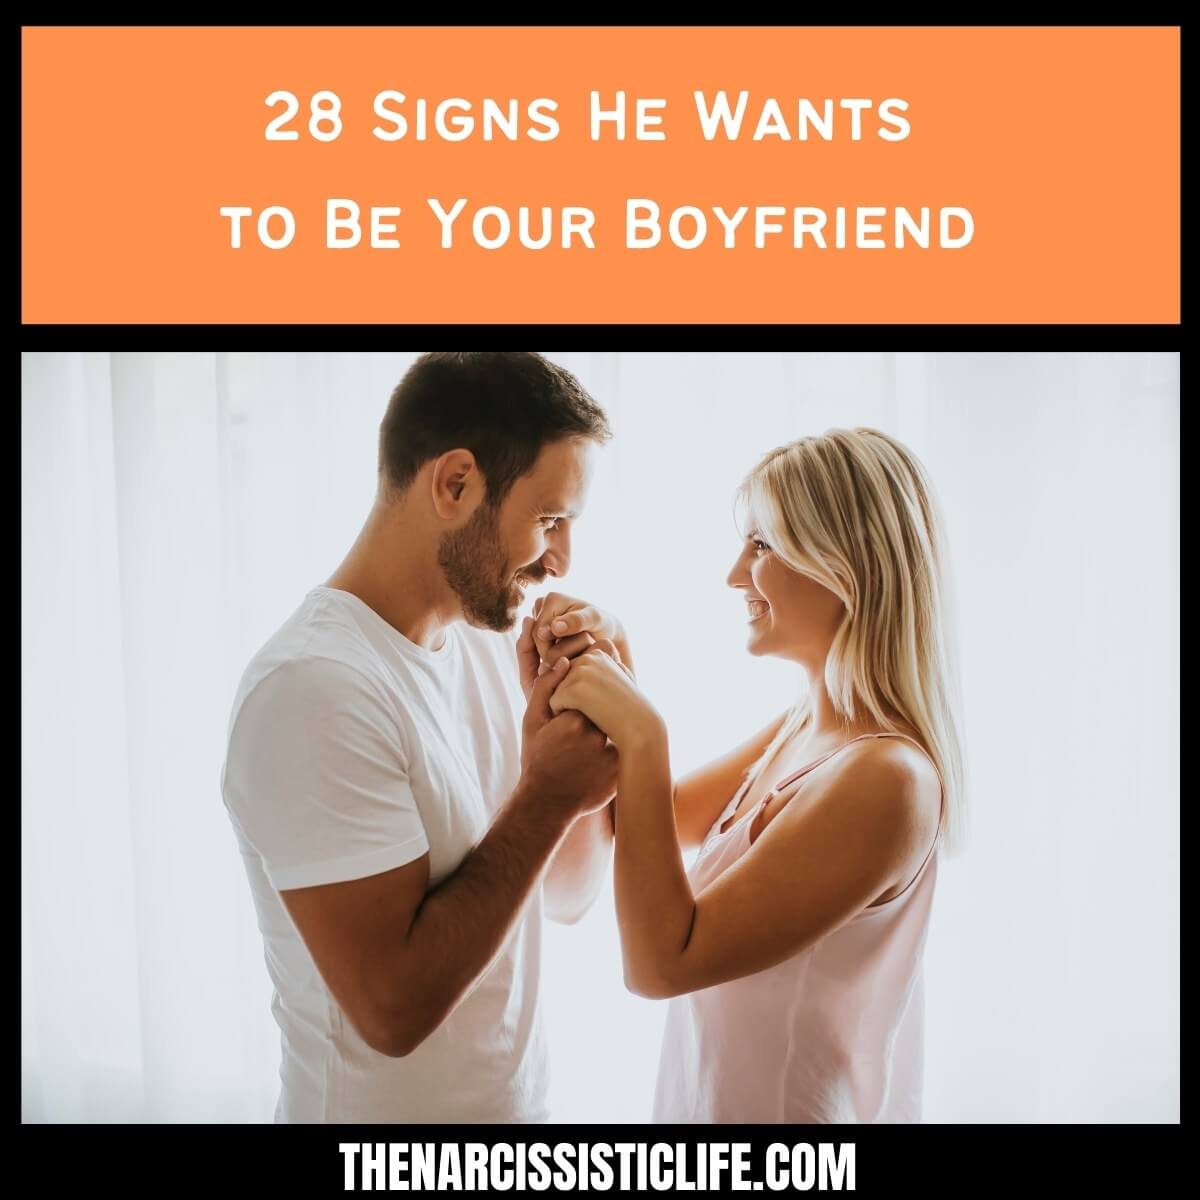 28 Signs He Wants to Be Your Boyfriend